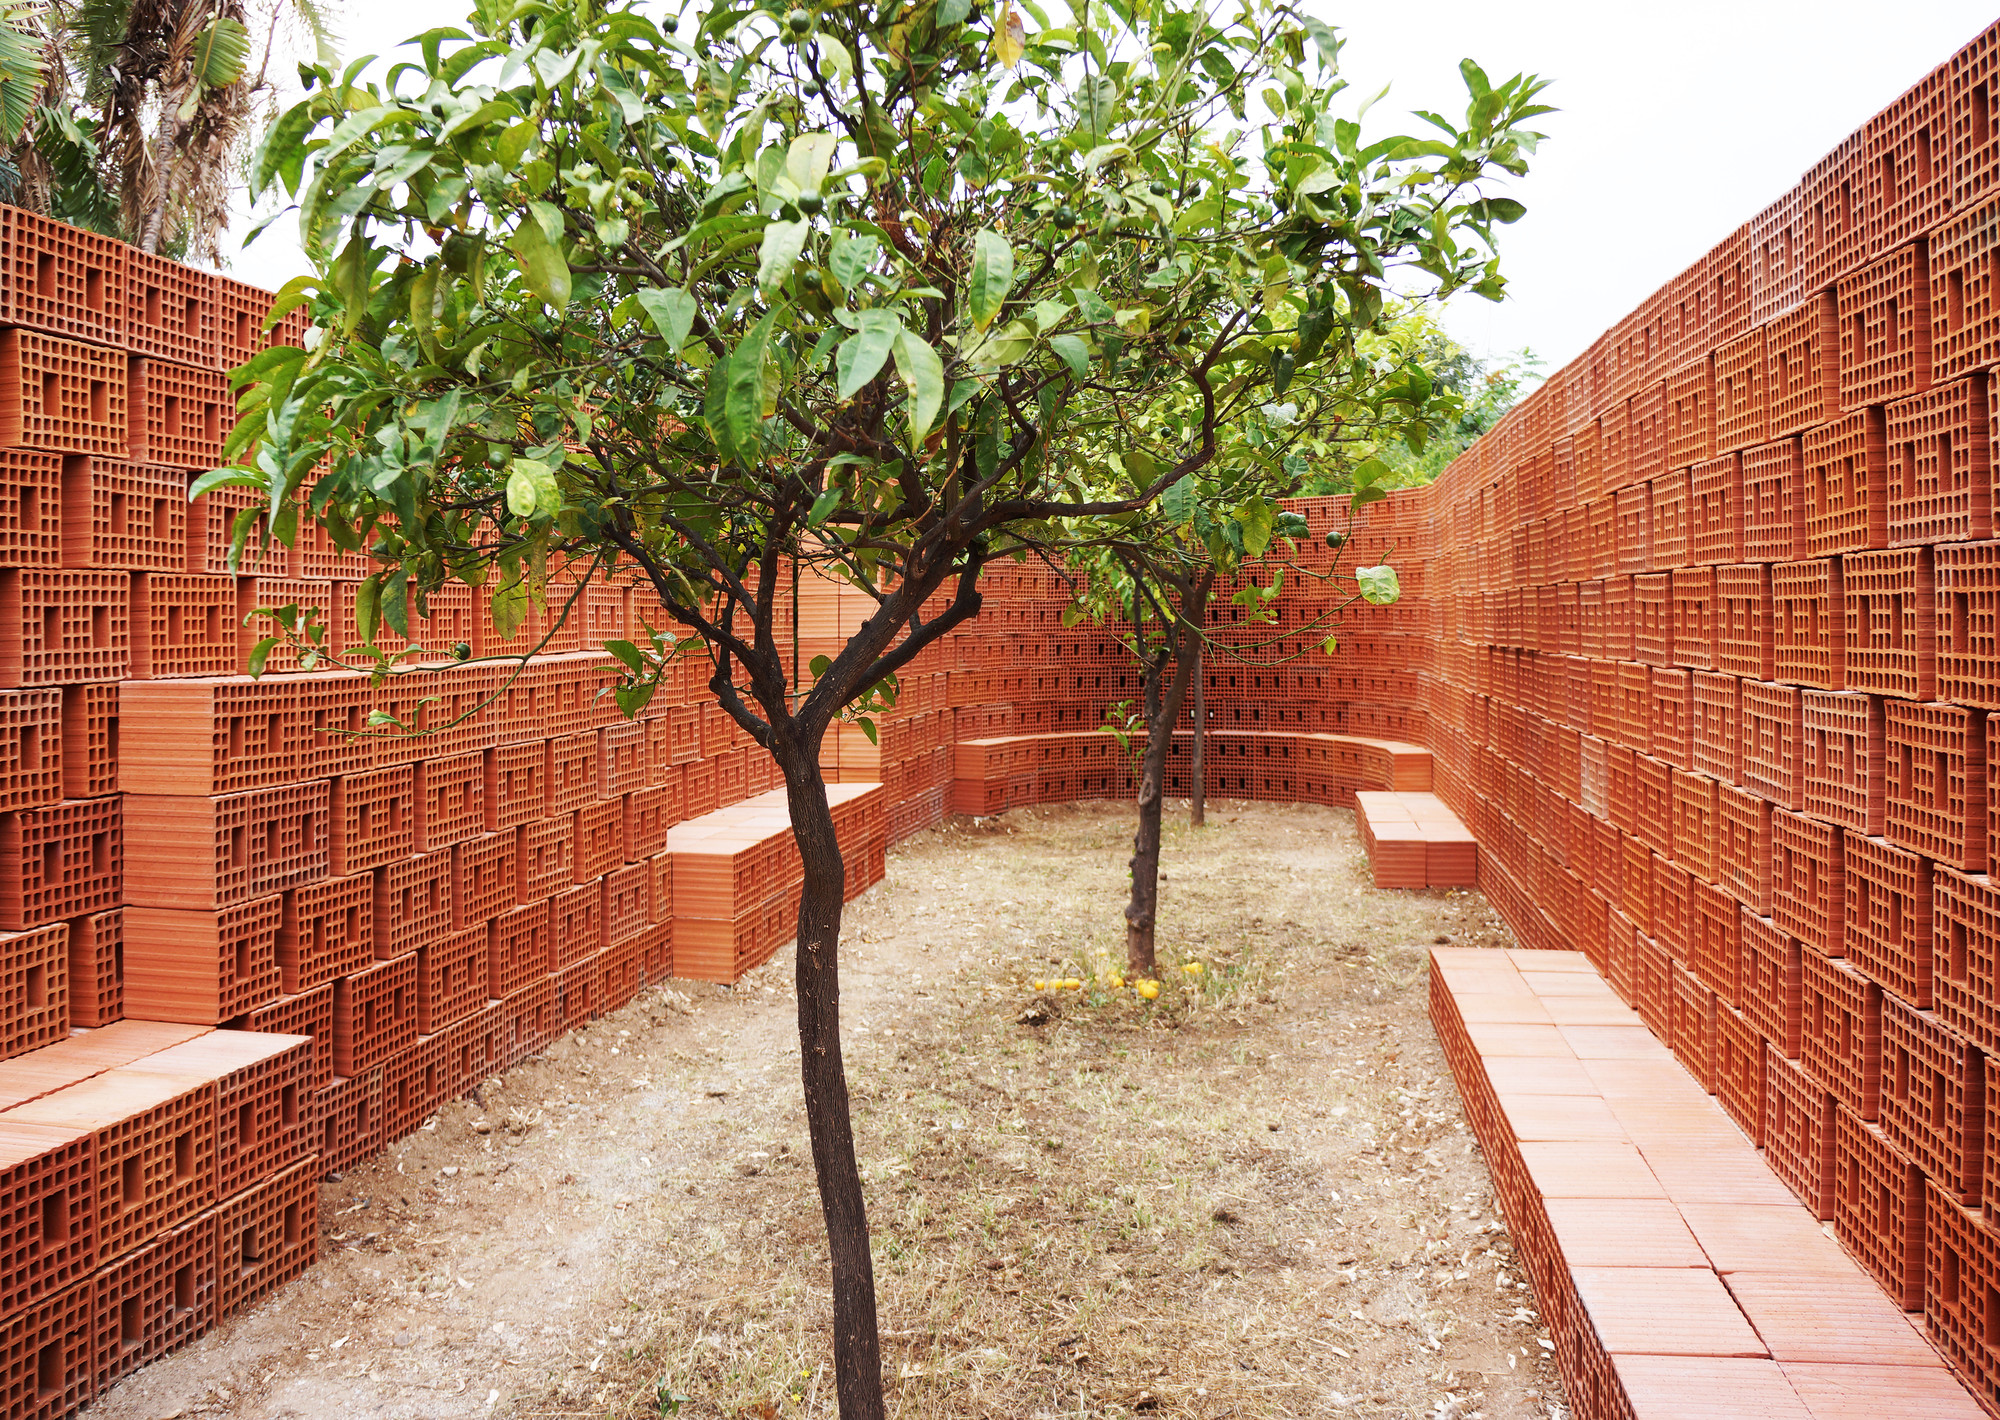 Two small trees with bright green leaves grow in the center of a number of stacked red bricks. Some of the bricks are arranged to form benches in the clearing, while most make up a wall.